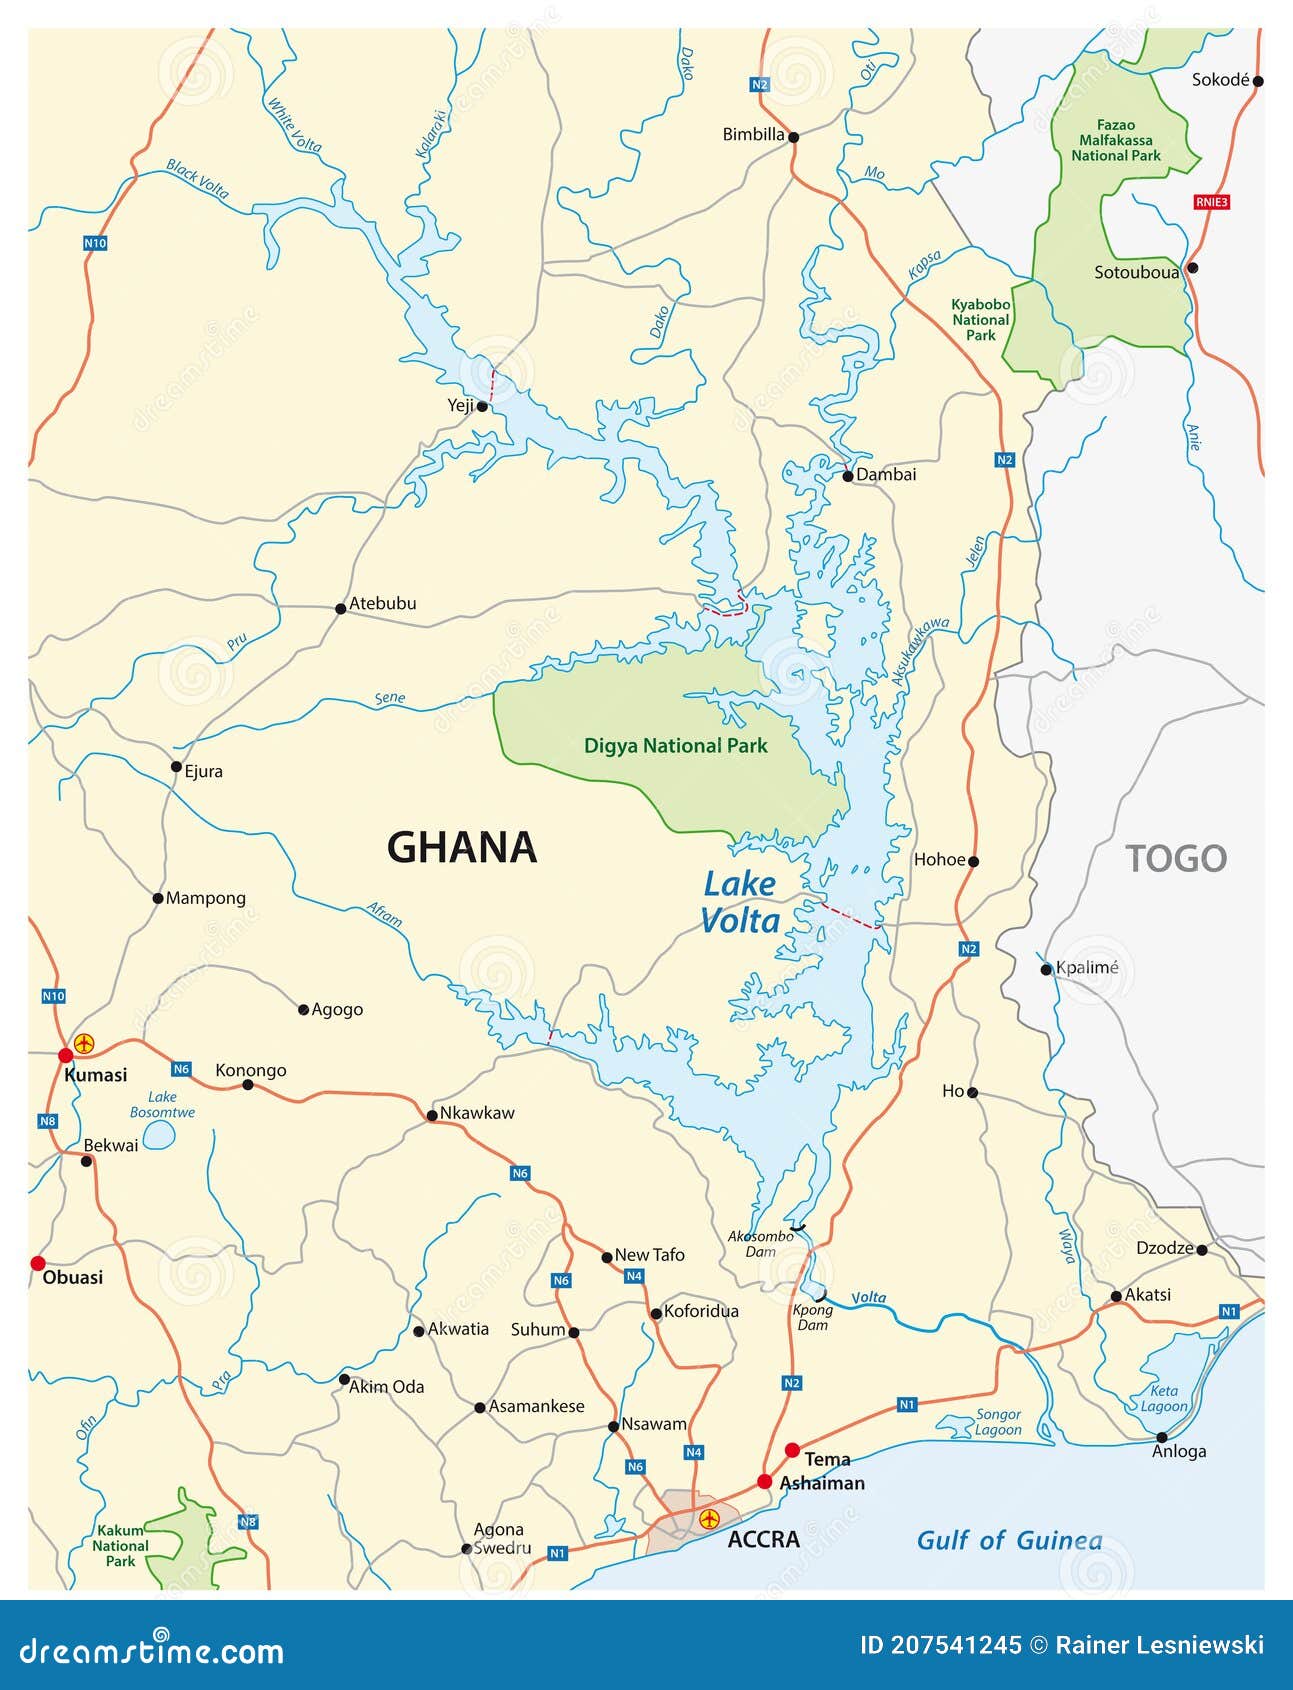  map of the largest reservoir in the world lake volta, ghana